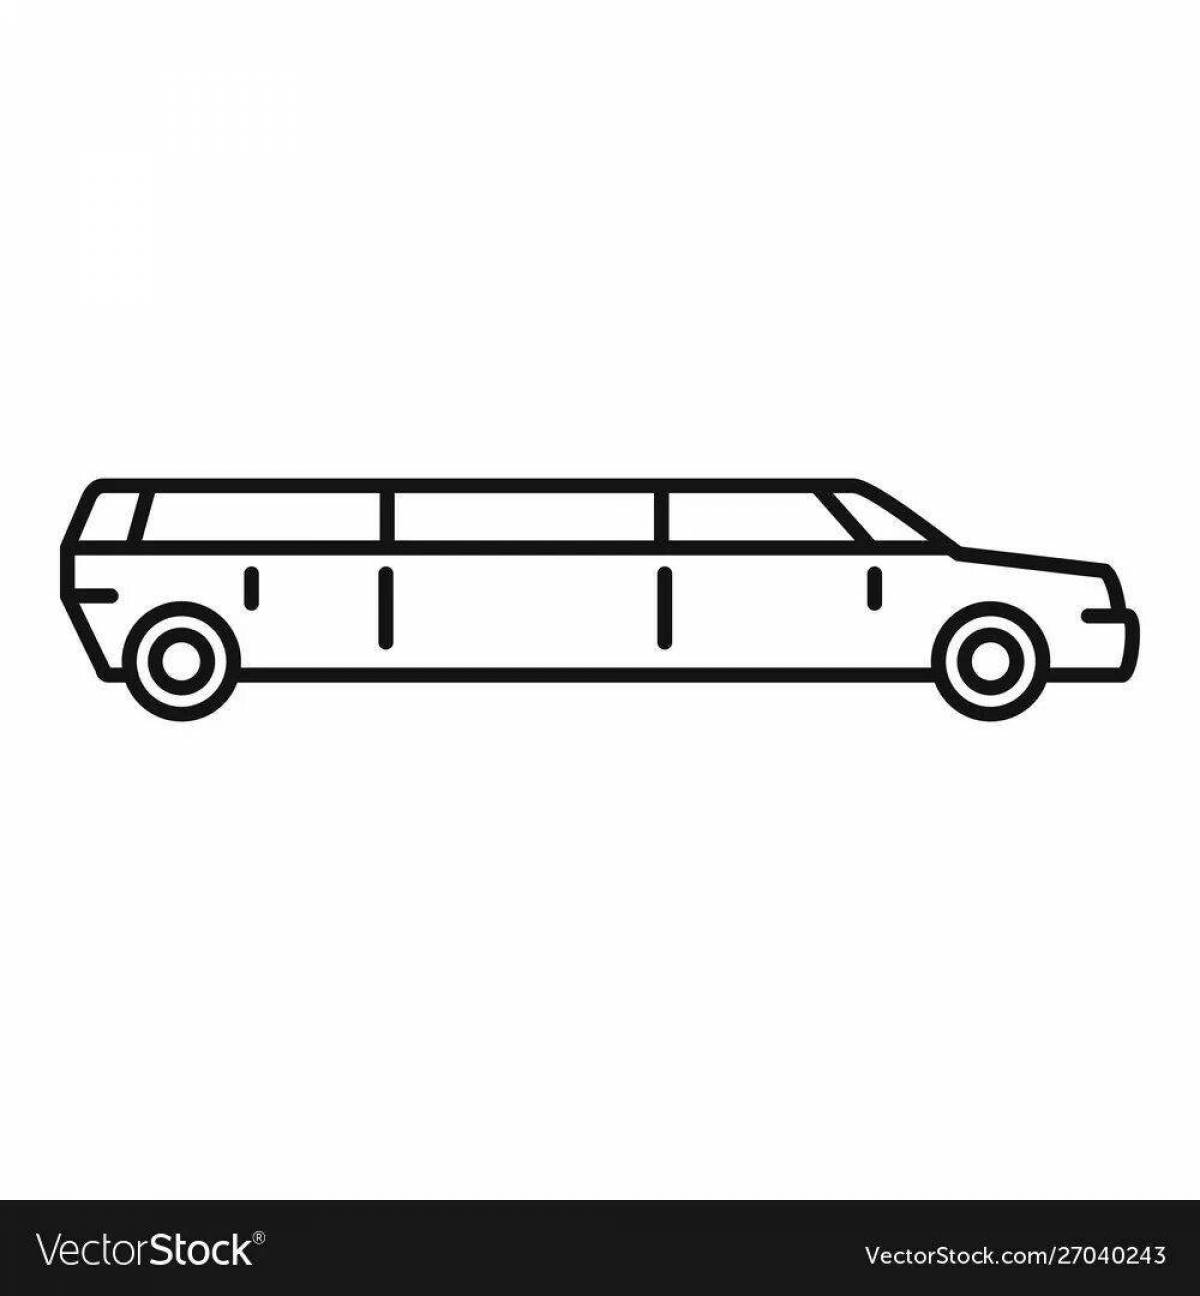 Fabulous limousine coloring pages for kids